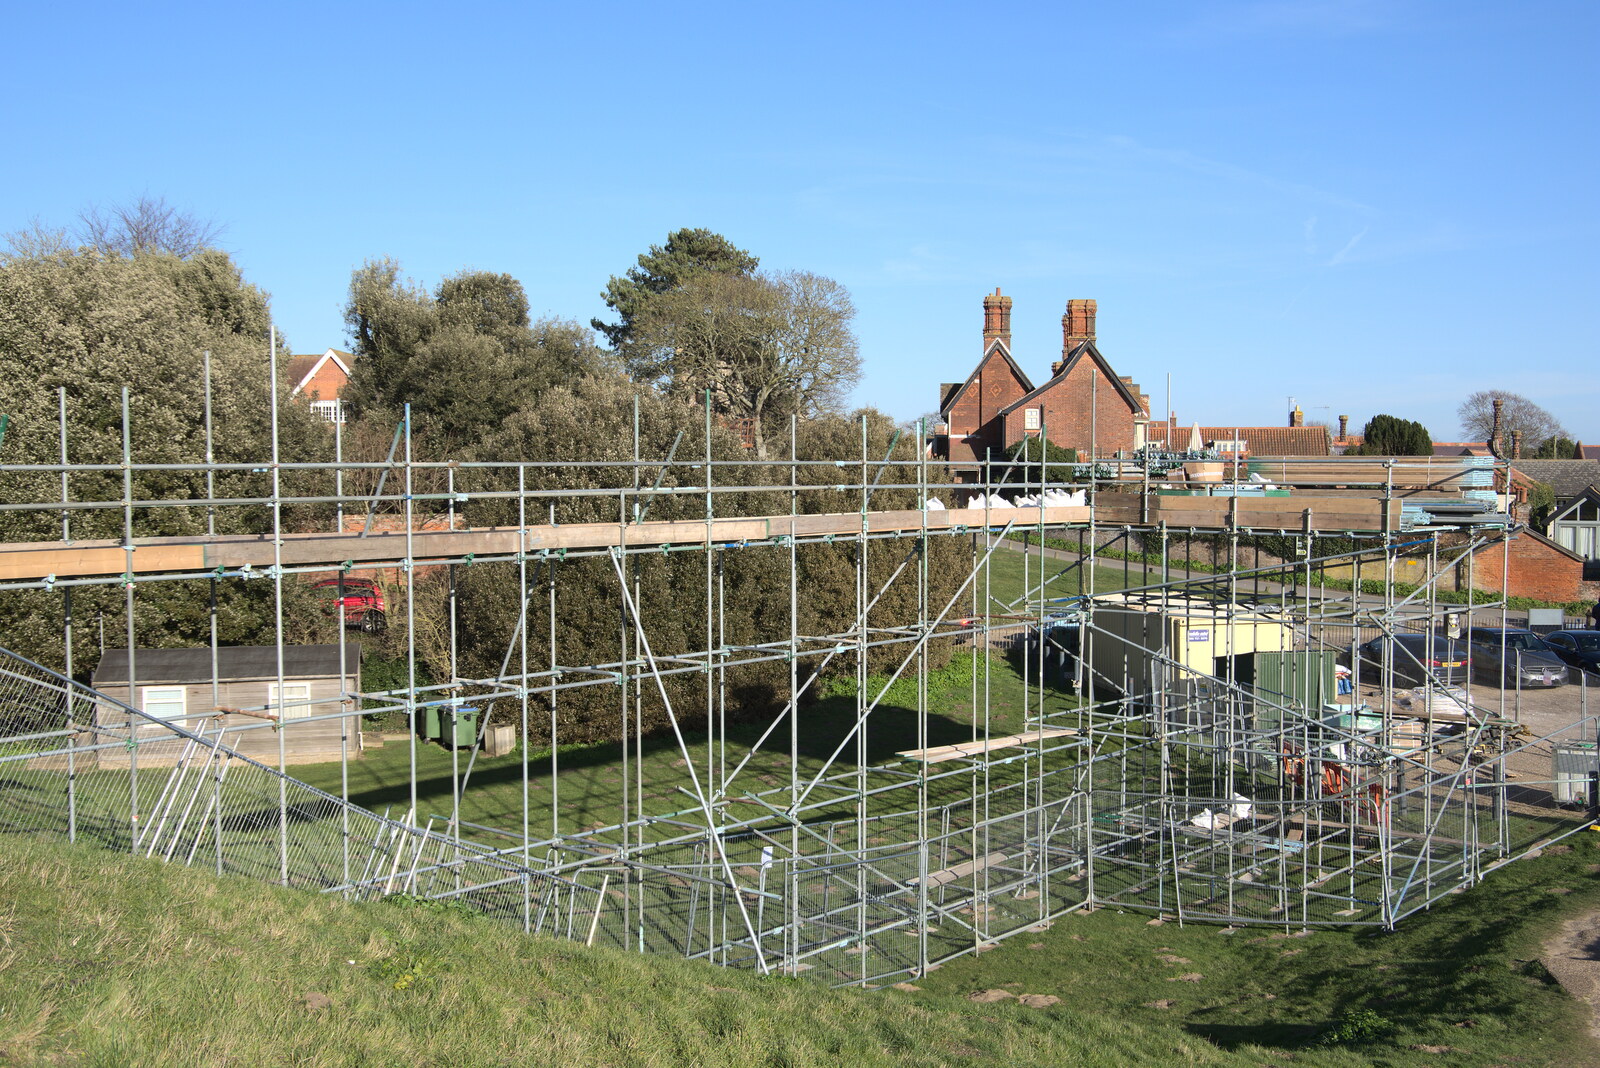 There's also a huge scaffolding pier from A Trip to Orford Castle, Orford, Suffolk - 26th February 2022